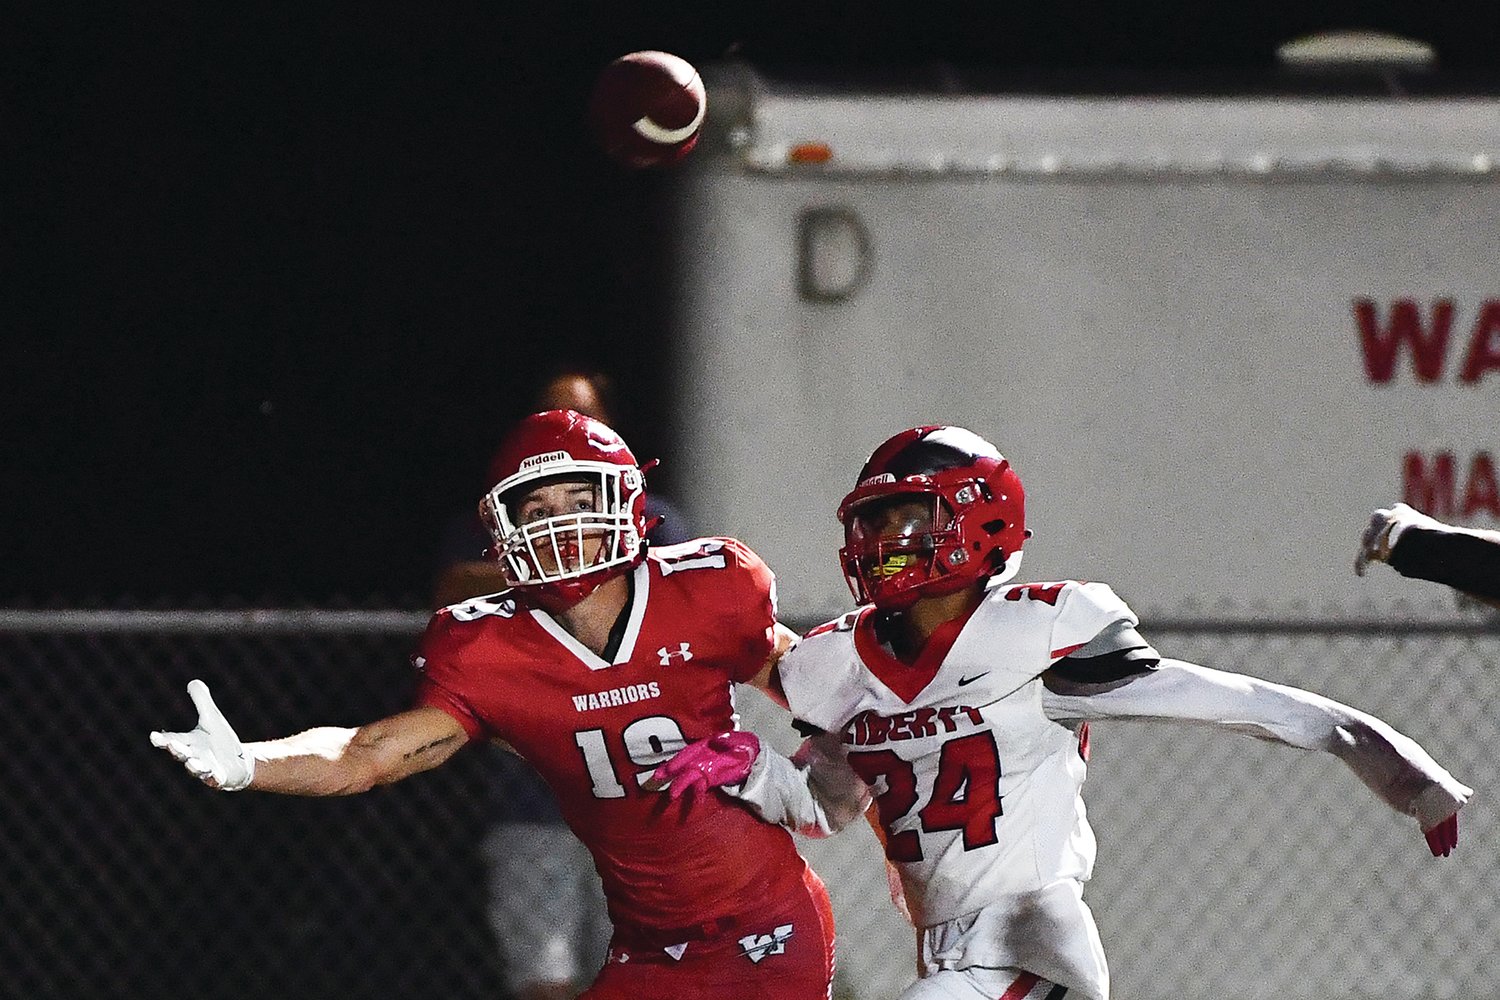 SIDELINE BATTLE — Warrenton’s Joseph Evans reaches for a pass in Friday’s season opener against Liberty. The Warriors fell 28-14 in the debut for head coach Jason Koper.